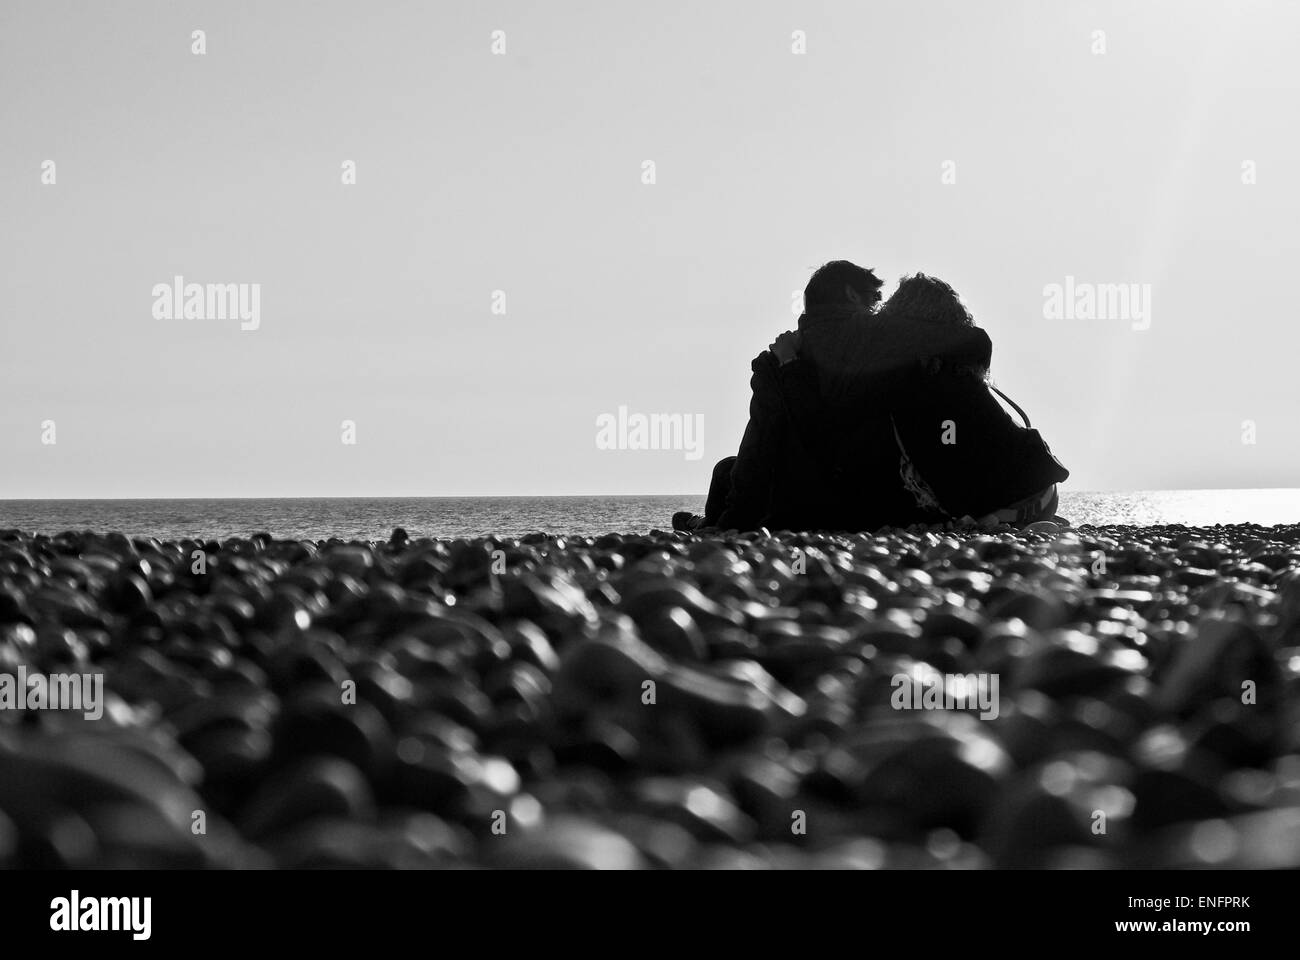 Couple on beach, Black & White silhouette Banque D'Images